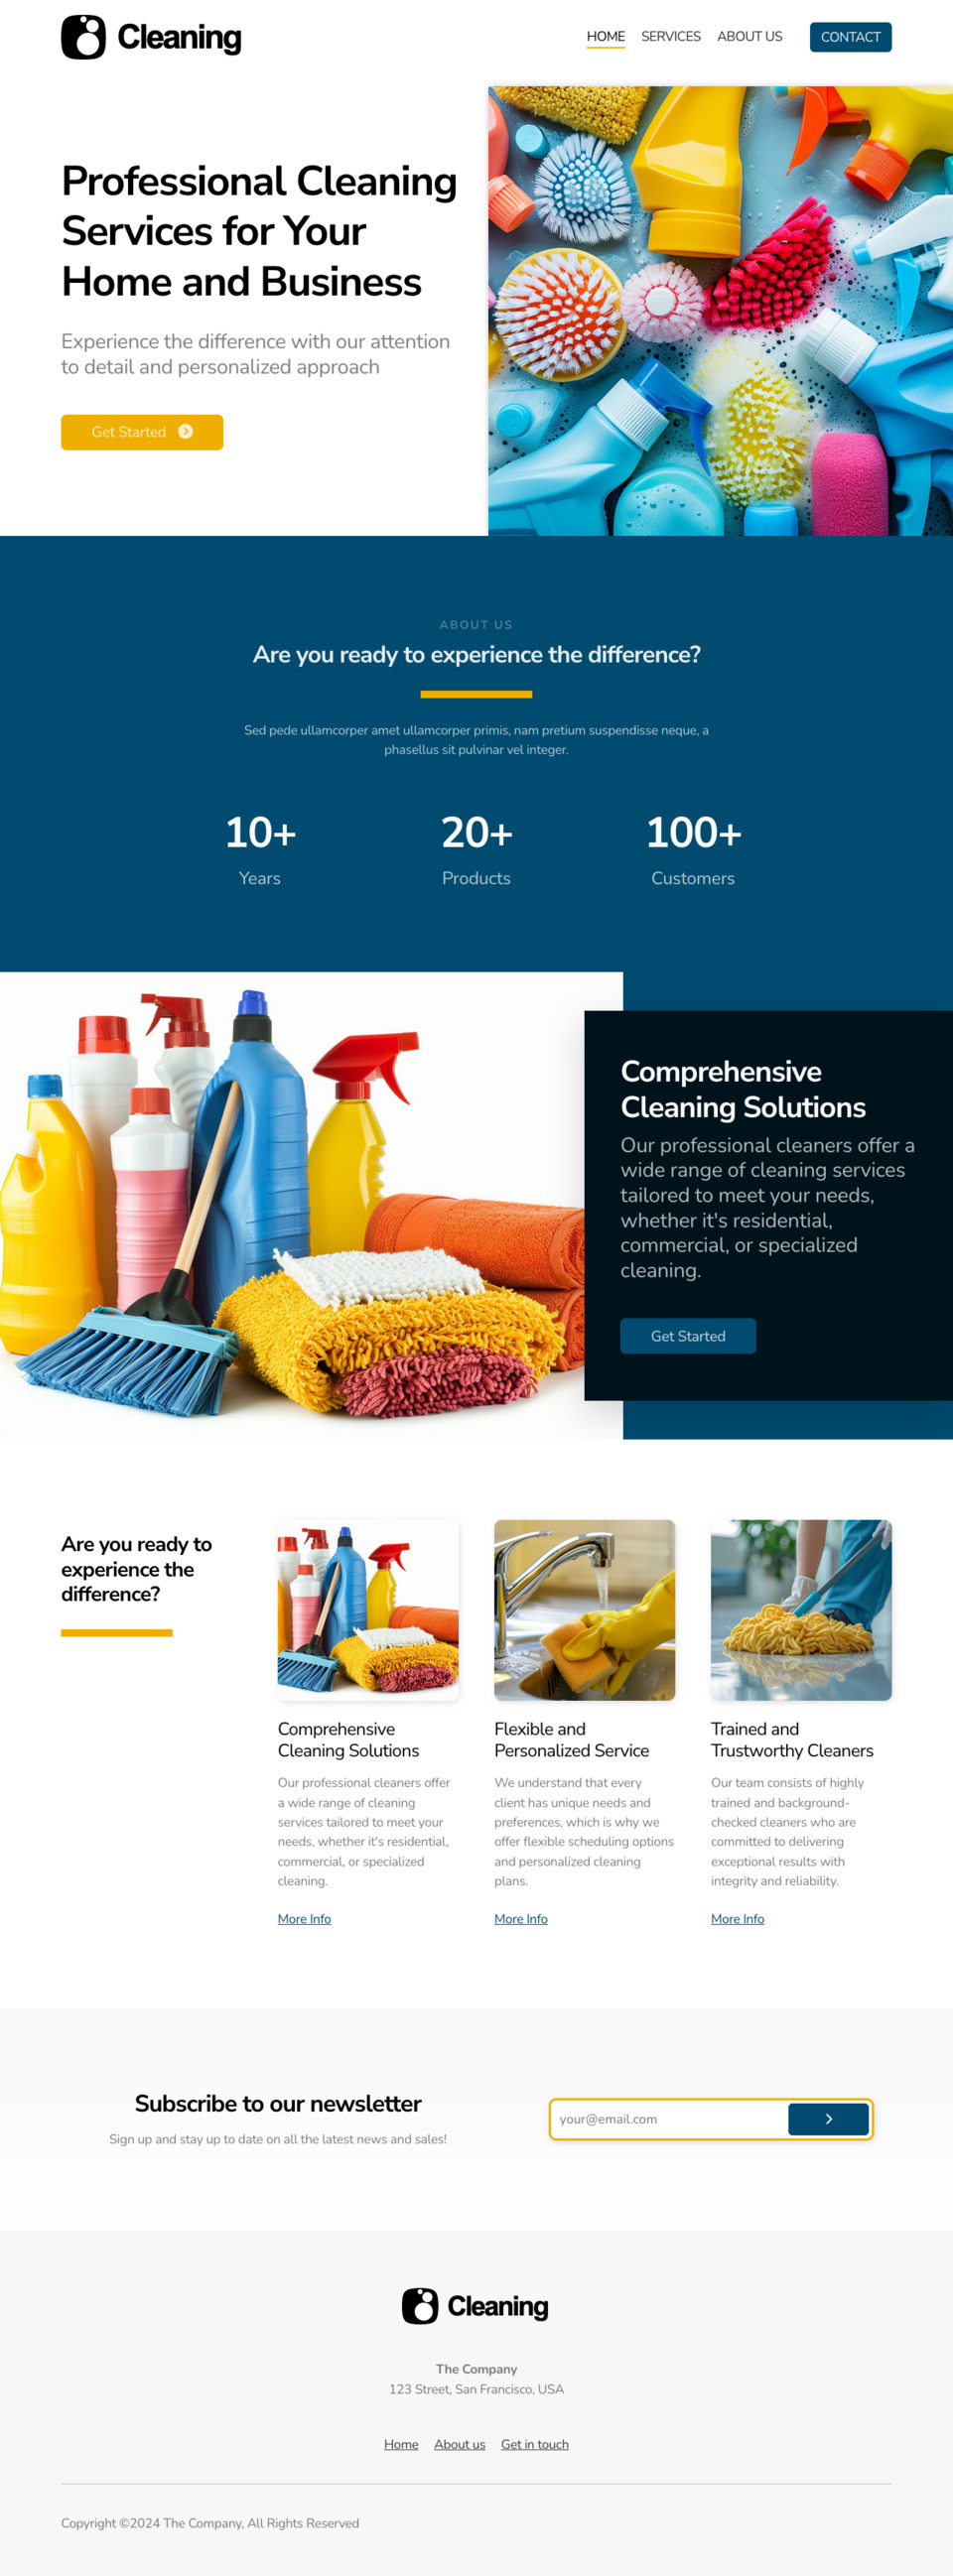 Cleaning Service Website Template - Ideal for cleaning service providers, maid services, and small businesses in the cleaning industry